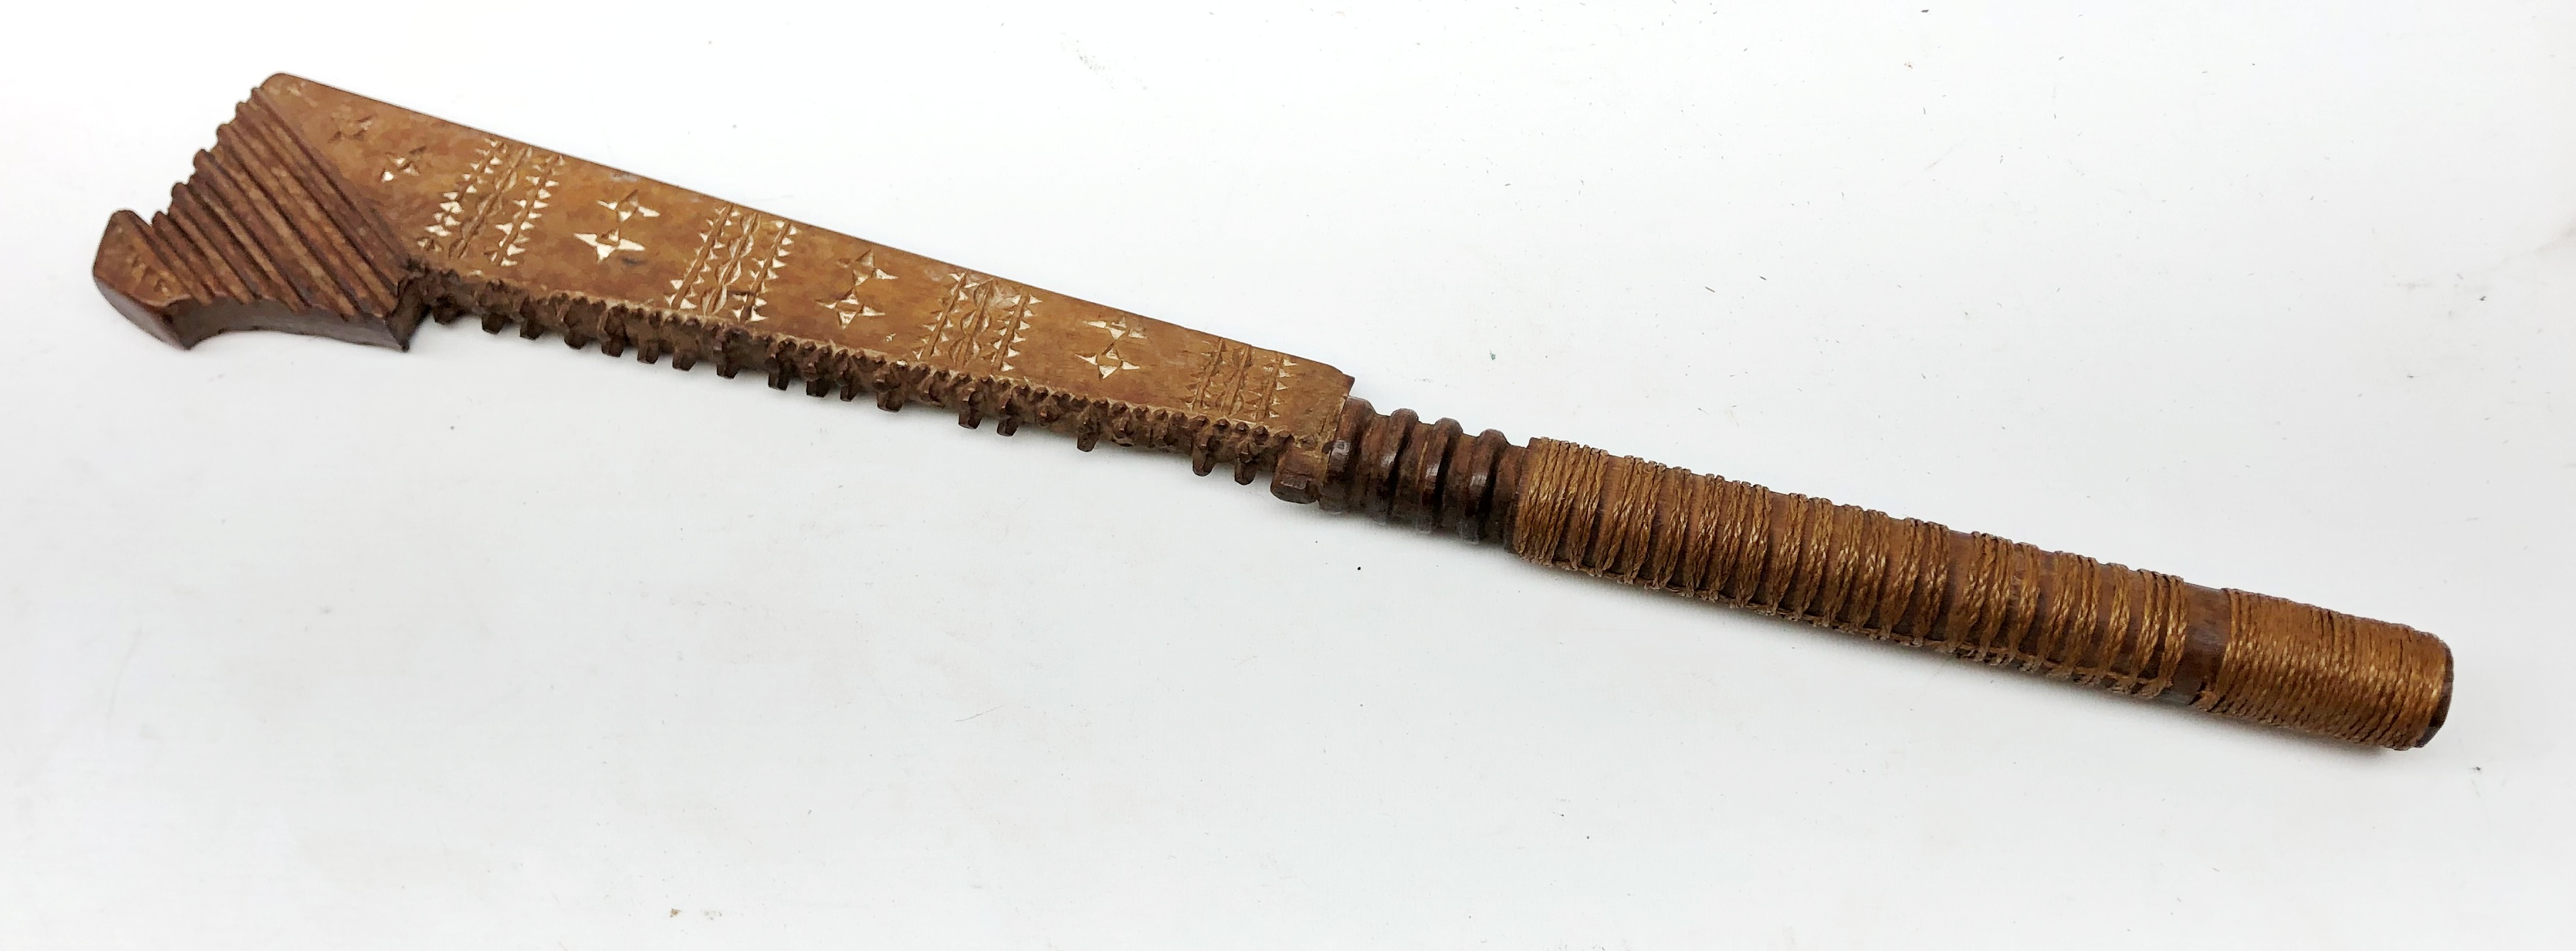 Samoan wooden club, shaped blade with serrated edge and painted geometric decoration,